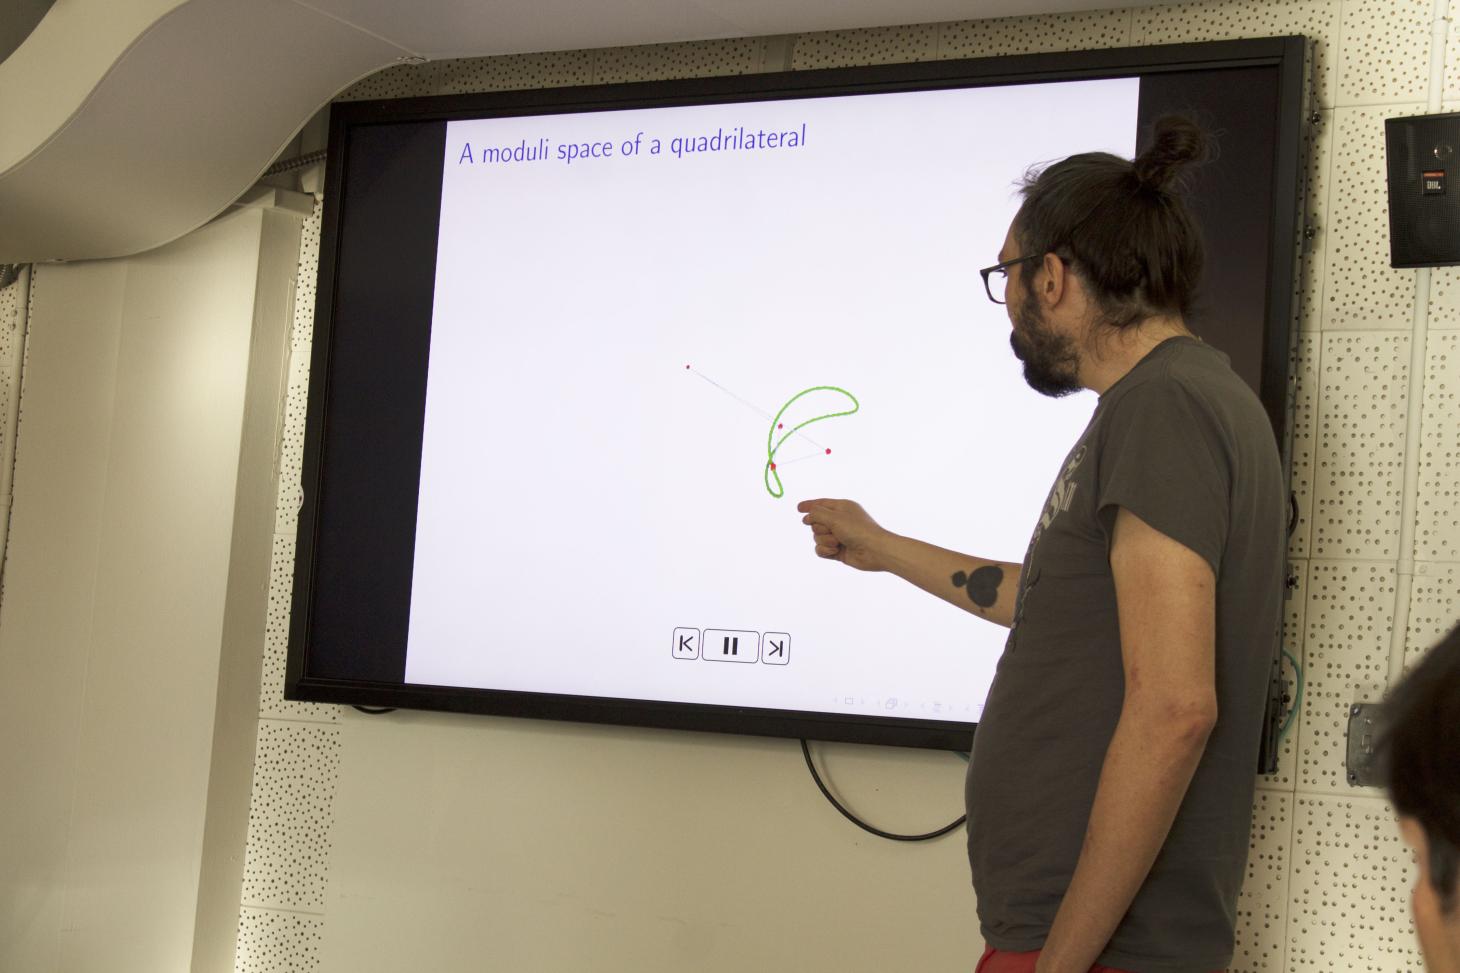 Stephen Krughoff presenting in front of a screen.